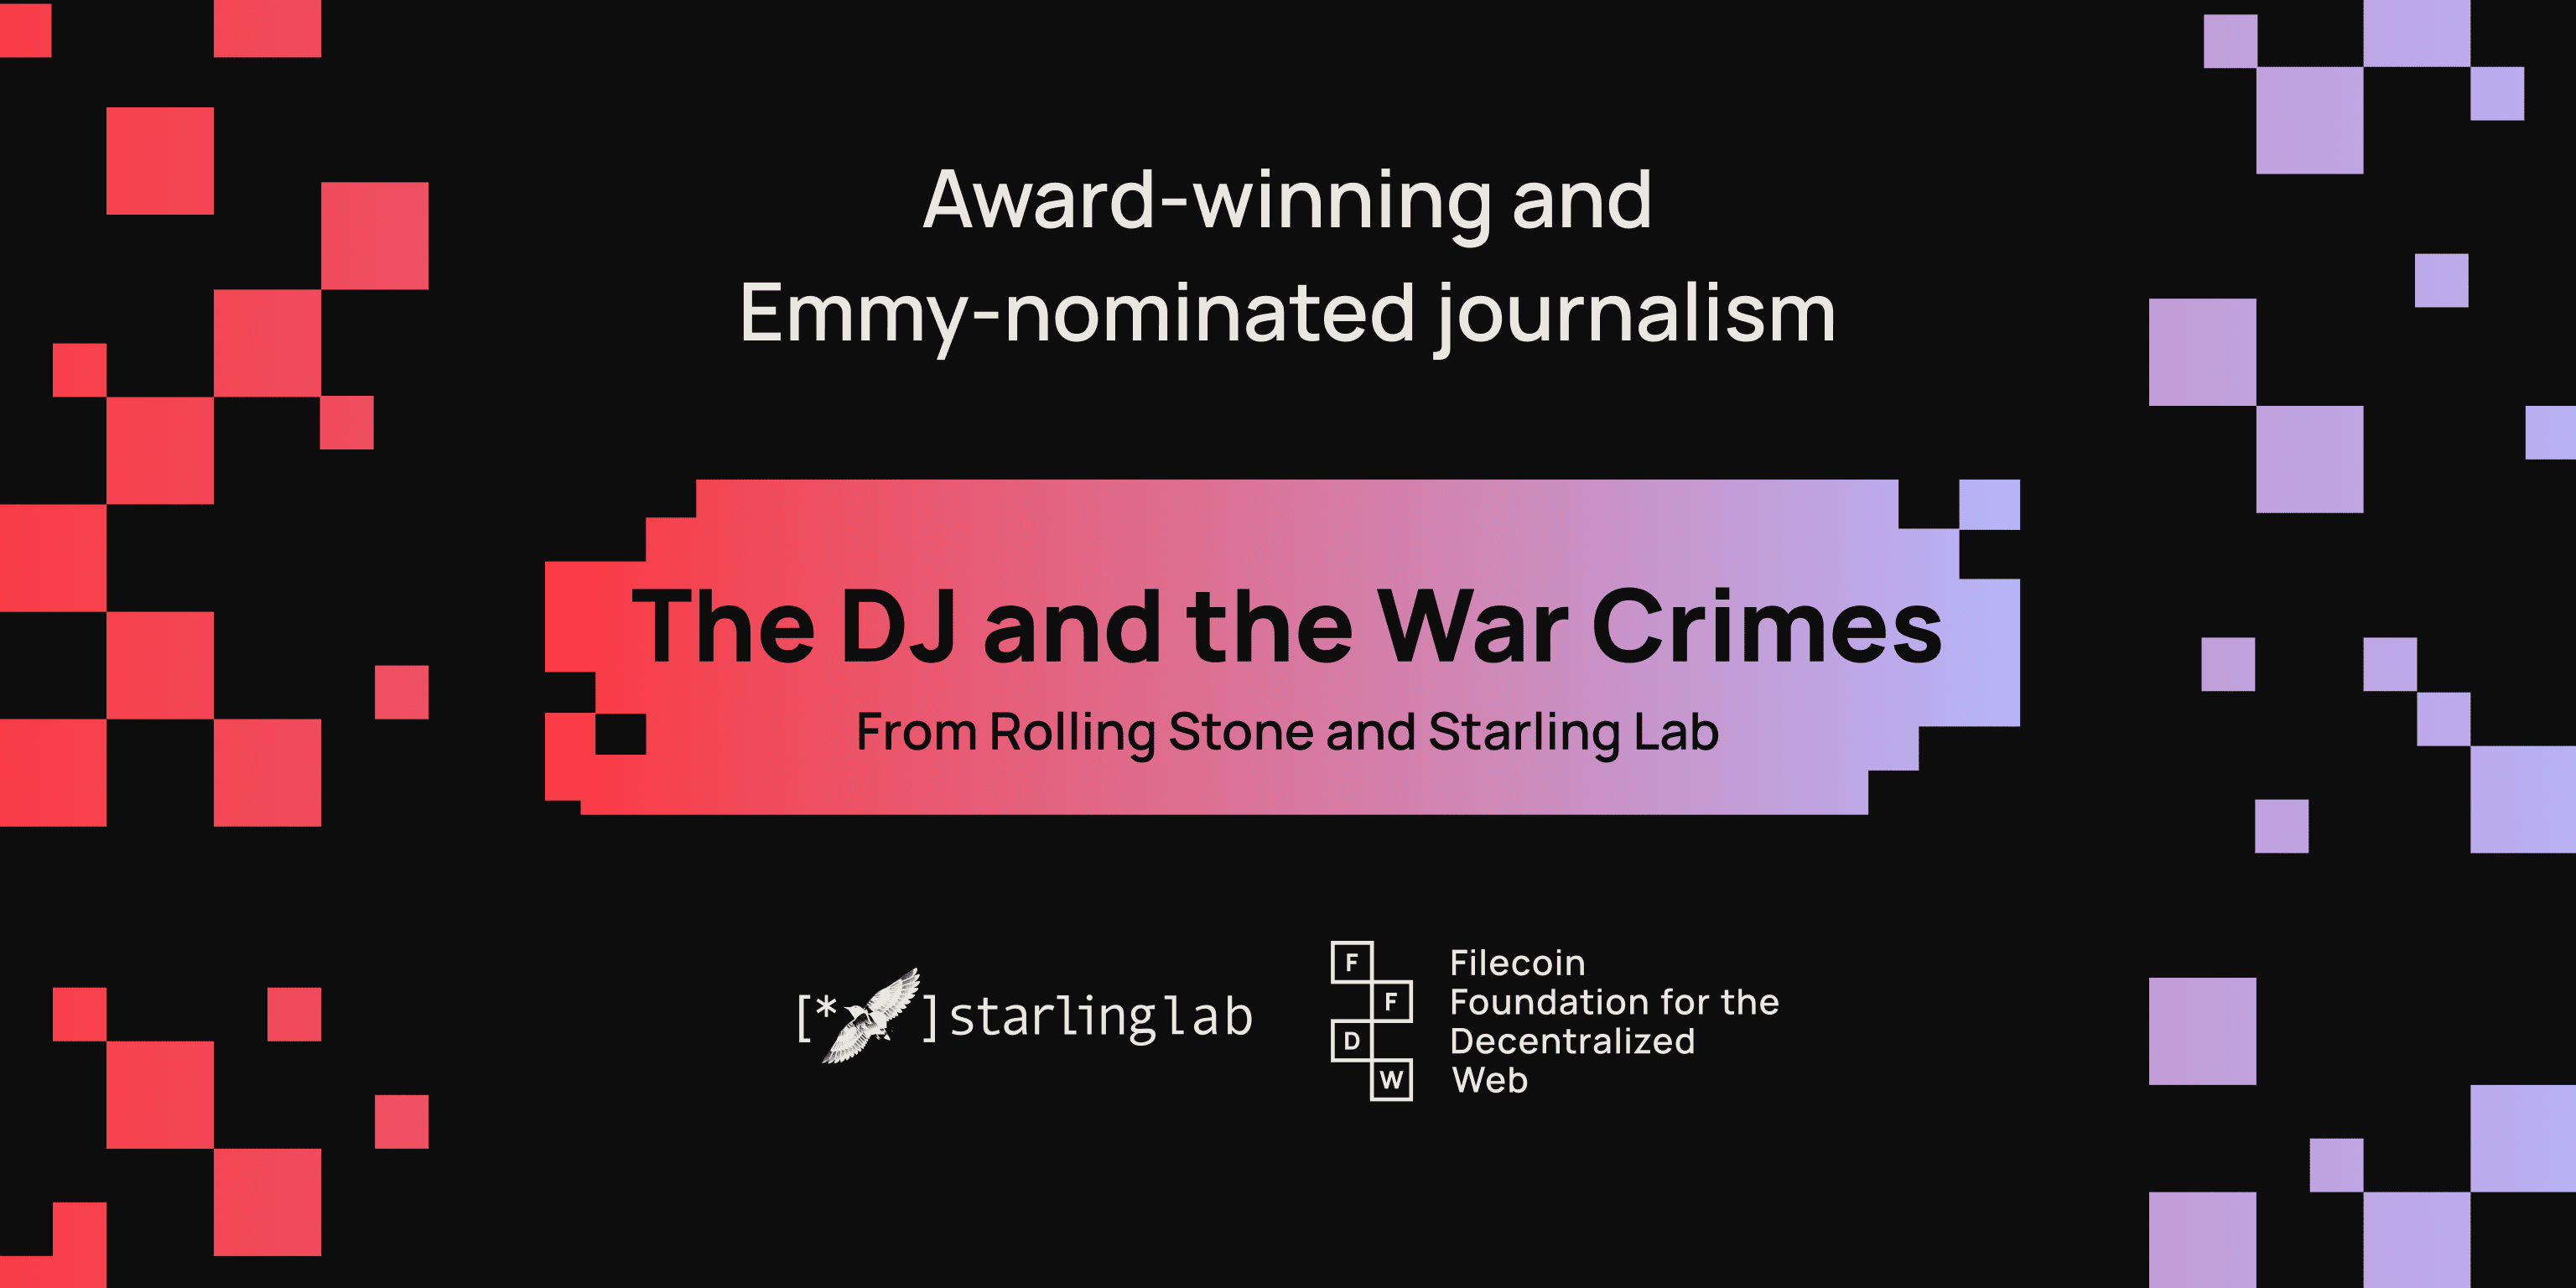 Award-winning and Emmy-nominated journalism, The DJ and the War Crimes from Rolling Stone and Starling Lab